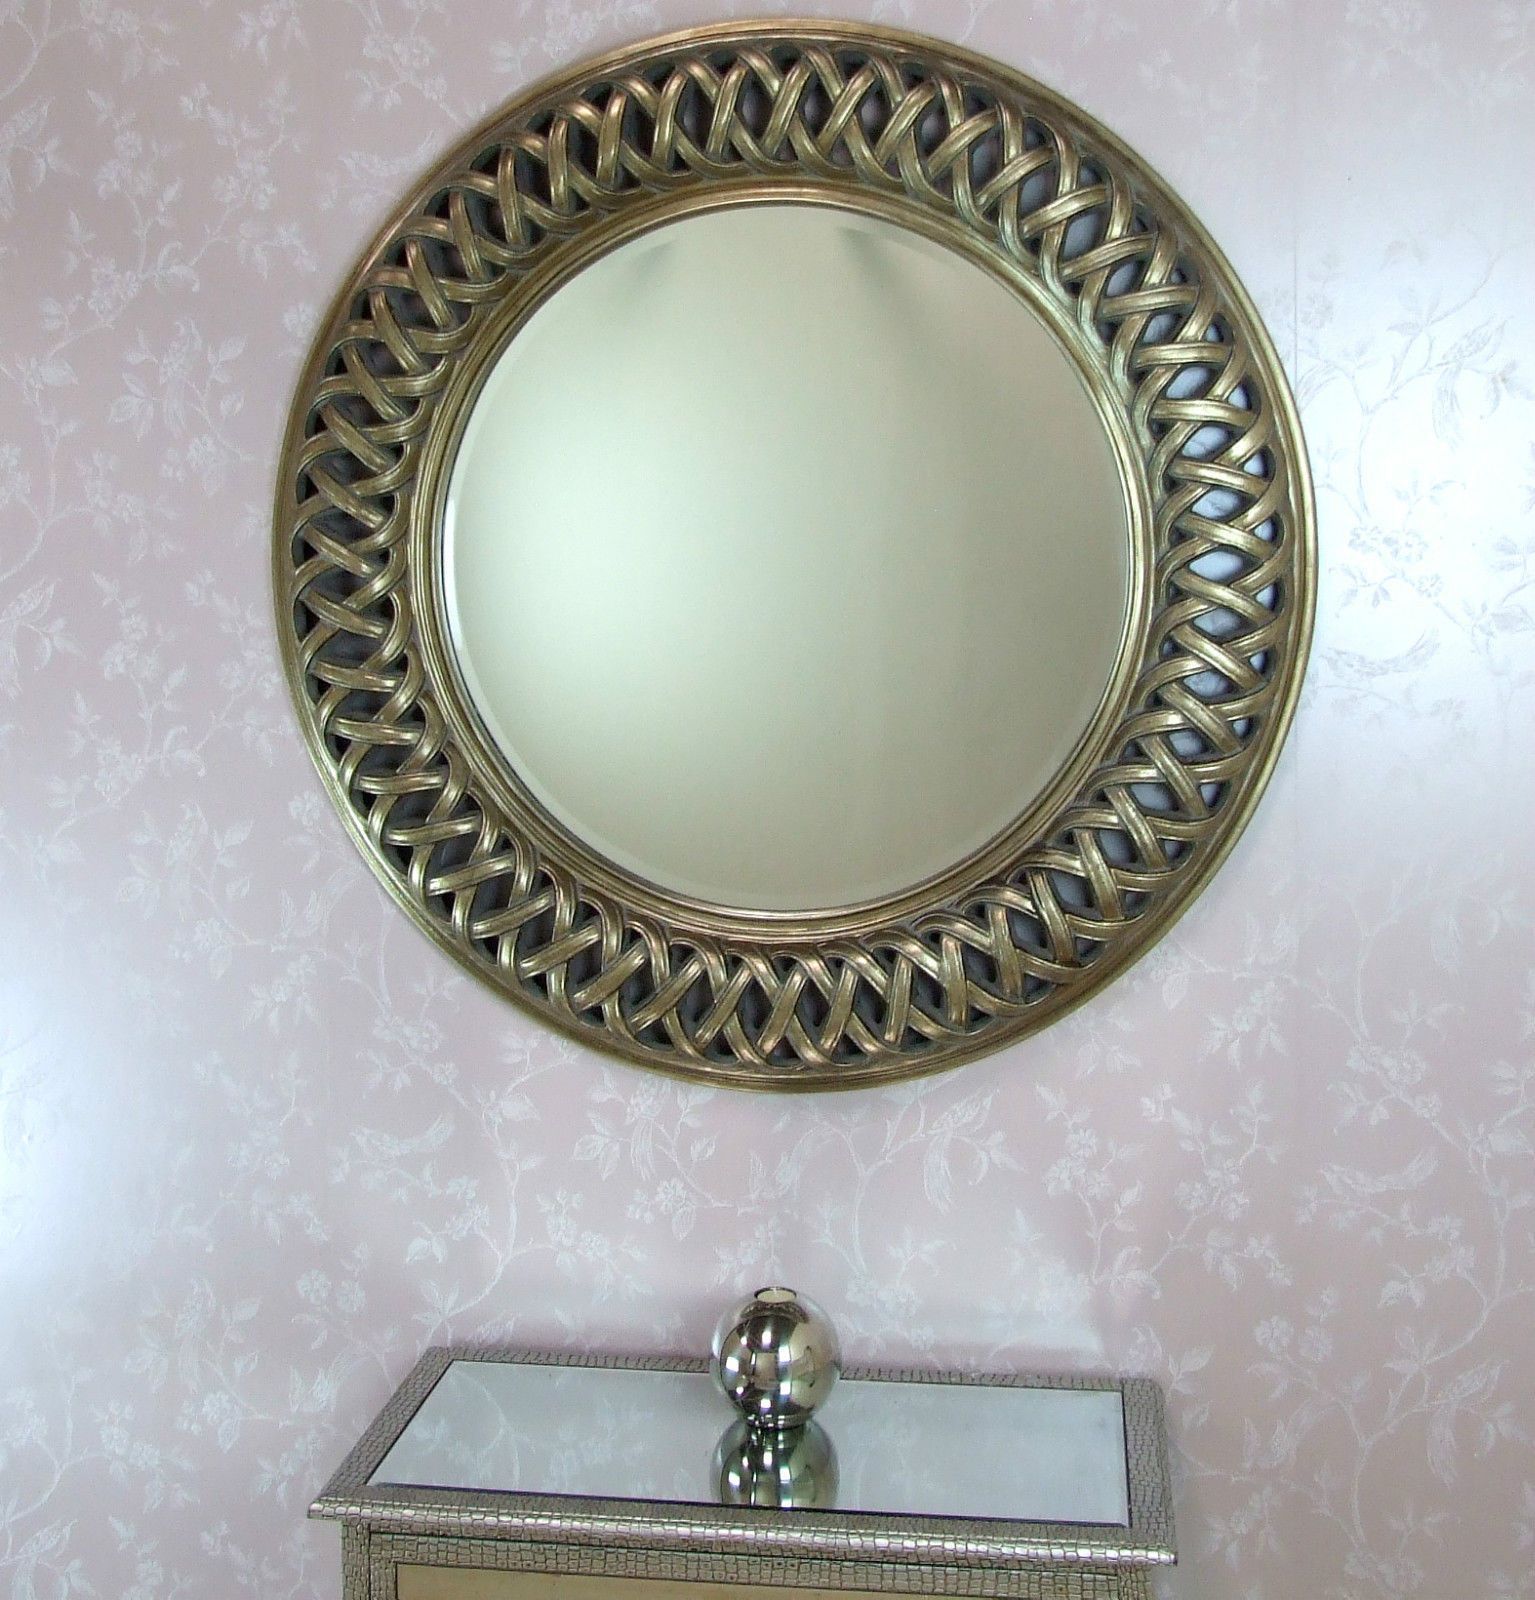 Venice Very Large Round Wall Mirror Champagne Silver Frame Art Deco Intended For Antique Silver Round Wall Mirrors (View 14 of 15)